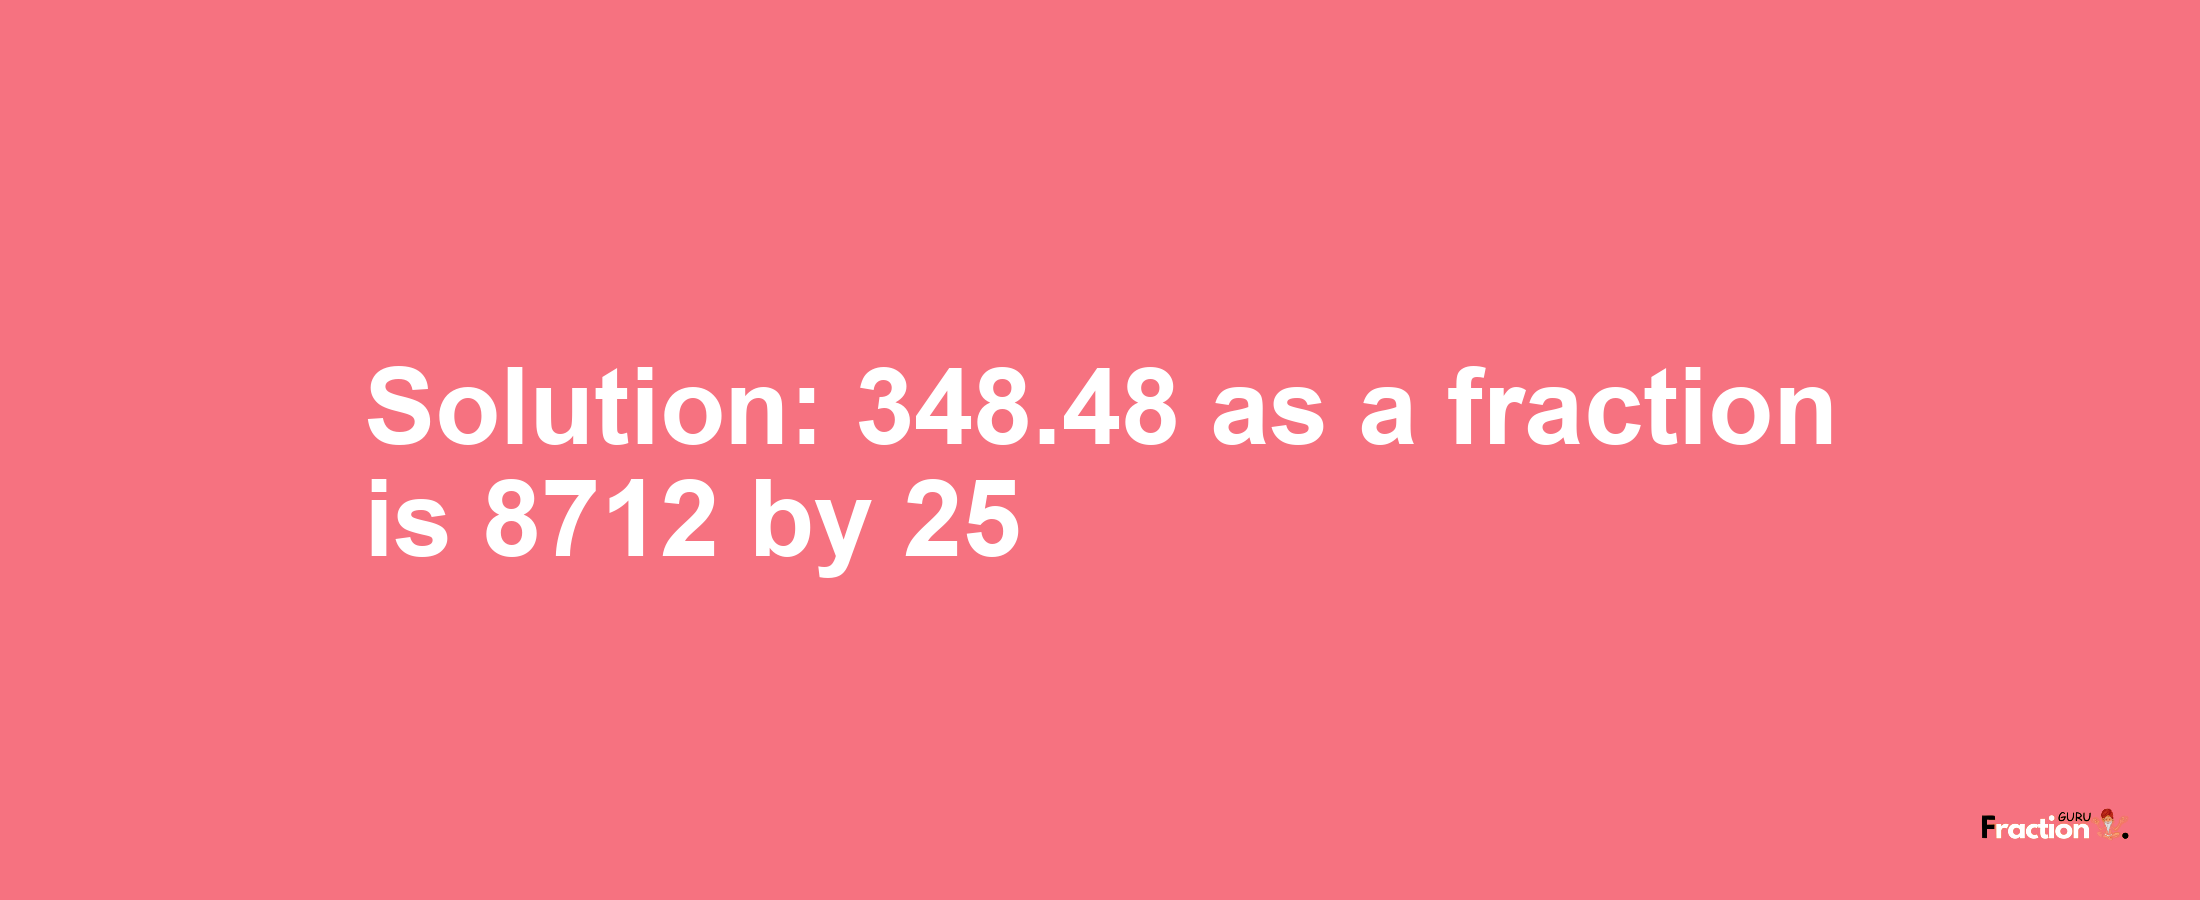 Solution:348.48 as a fraction is 8712/25